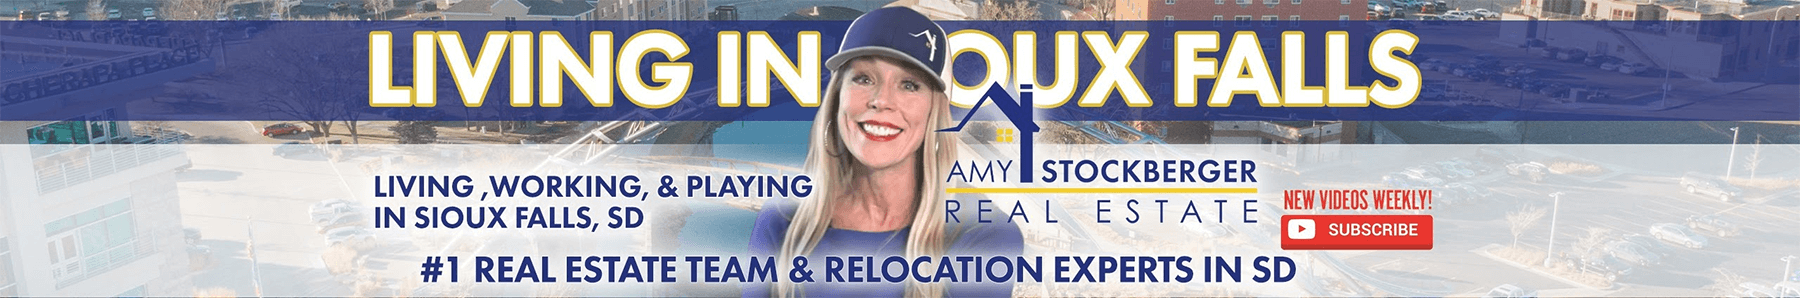 Amy Stockberger Real Estate Living in Sioux Falls Banner